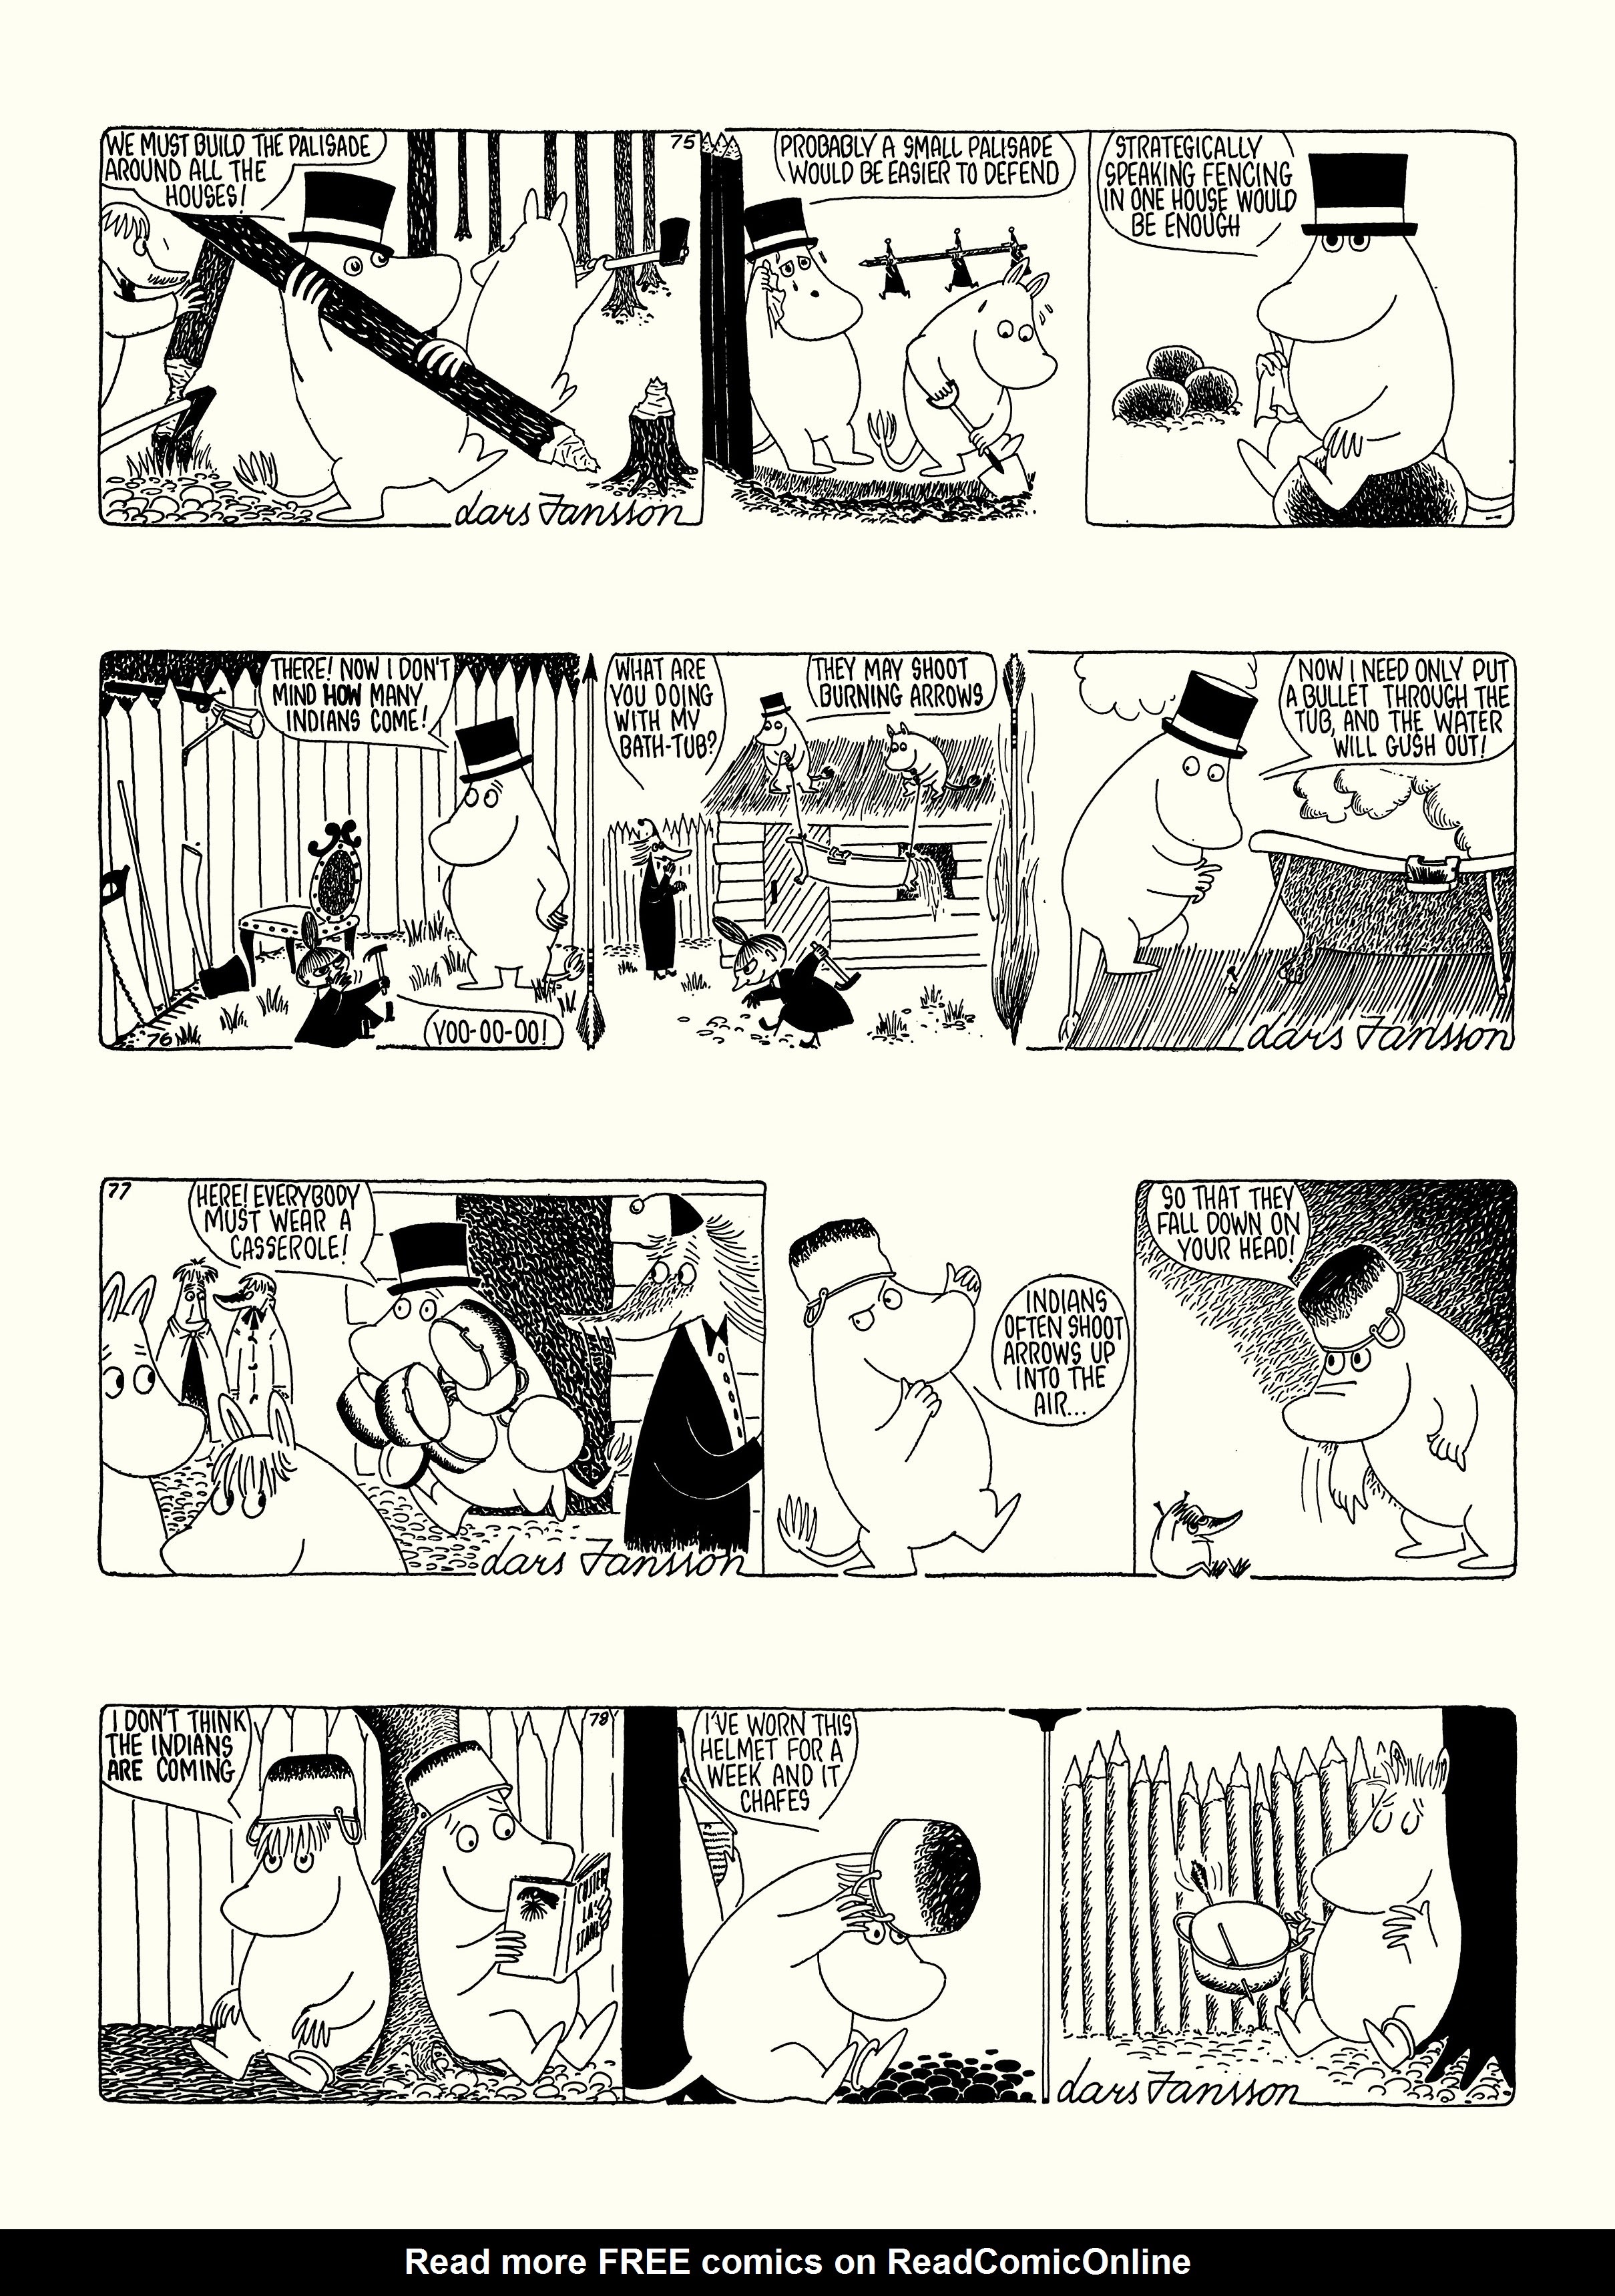 Read online Moomin: The Complete Lars Jansson Comic Strip comic -  Issue # TPB 7 - 25